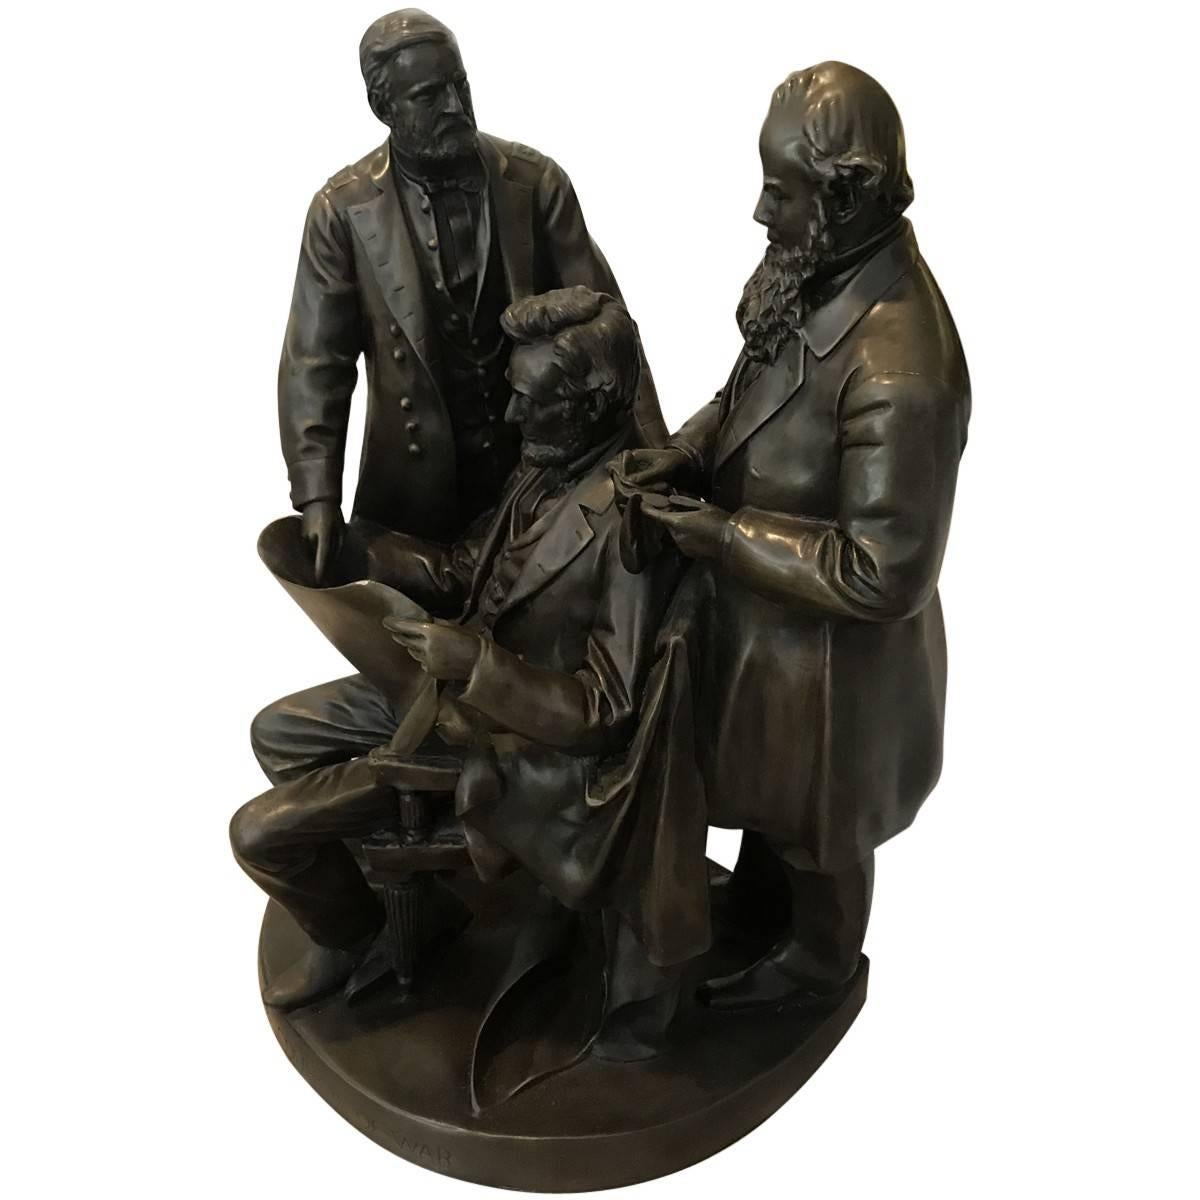 Bronze sculptor by John Rogers. Eye-catching and one-of-a-kind, this handcrafted bronze sculpture depicts President Abraham Lincoln, General Ulysses S. Grant and Secretary of War Edwin Stanton reviewing the Army of the Potomac plan. Handmade by